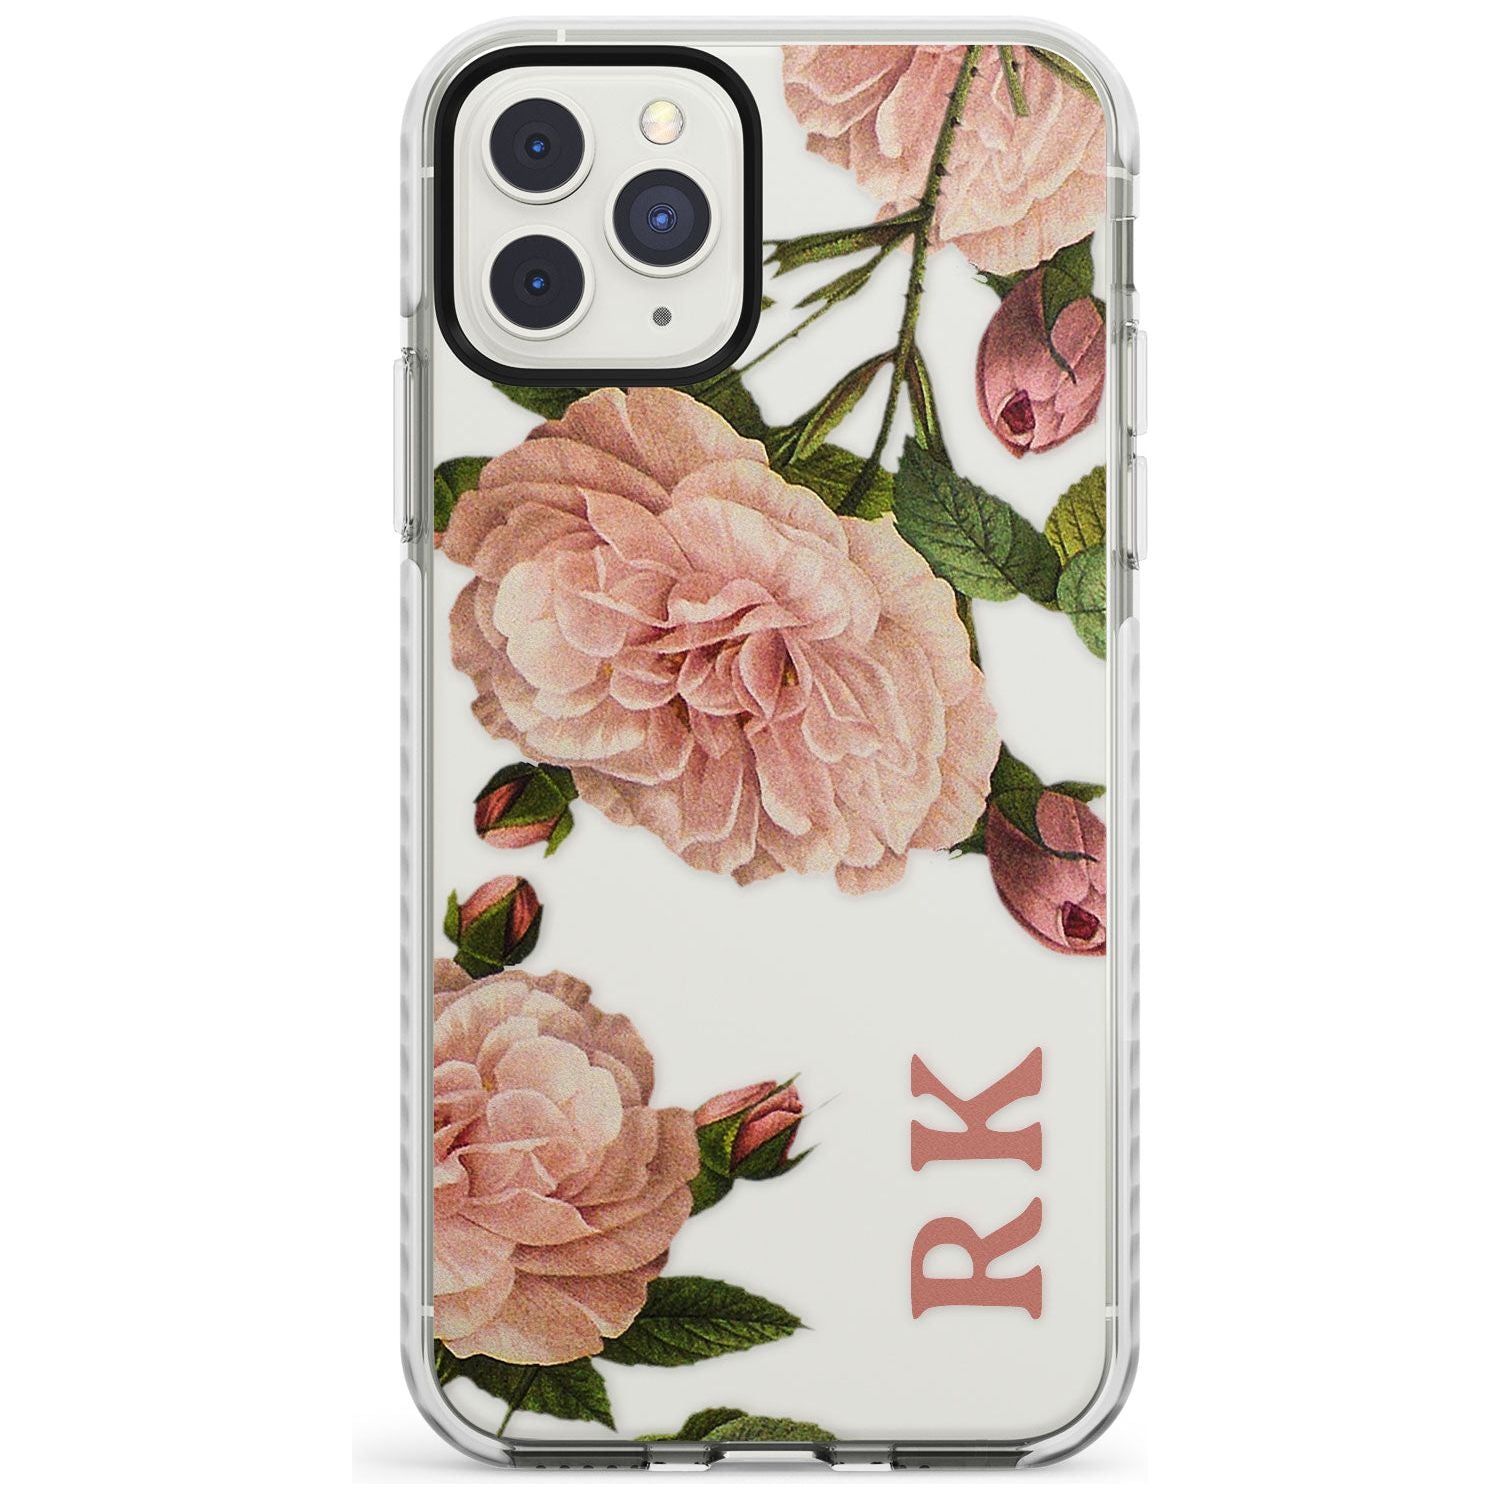 Custom Clear Vintage Floral Pale Pink Peonies Impact Phone Case for iPhone 11 Pro Max